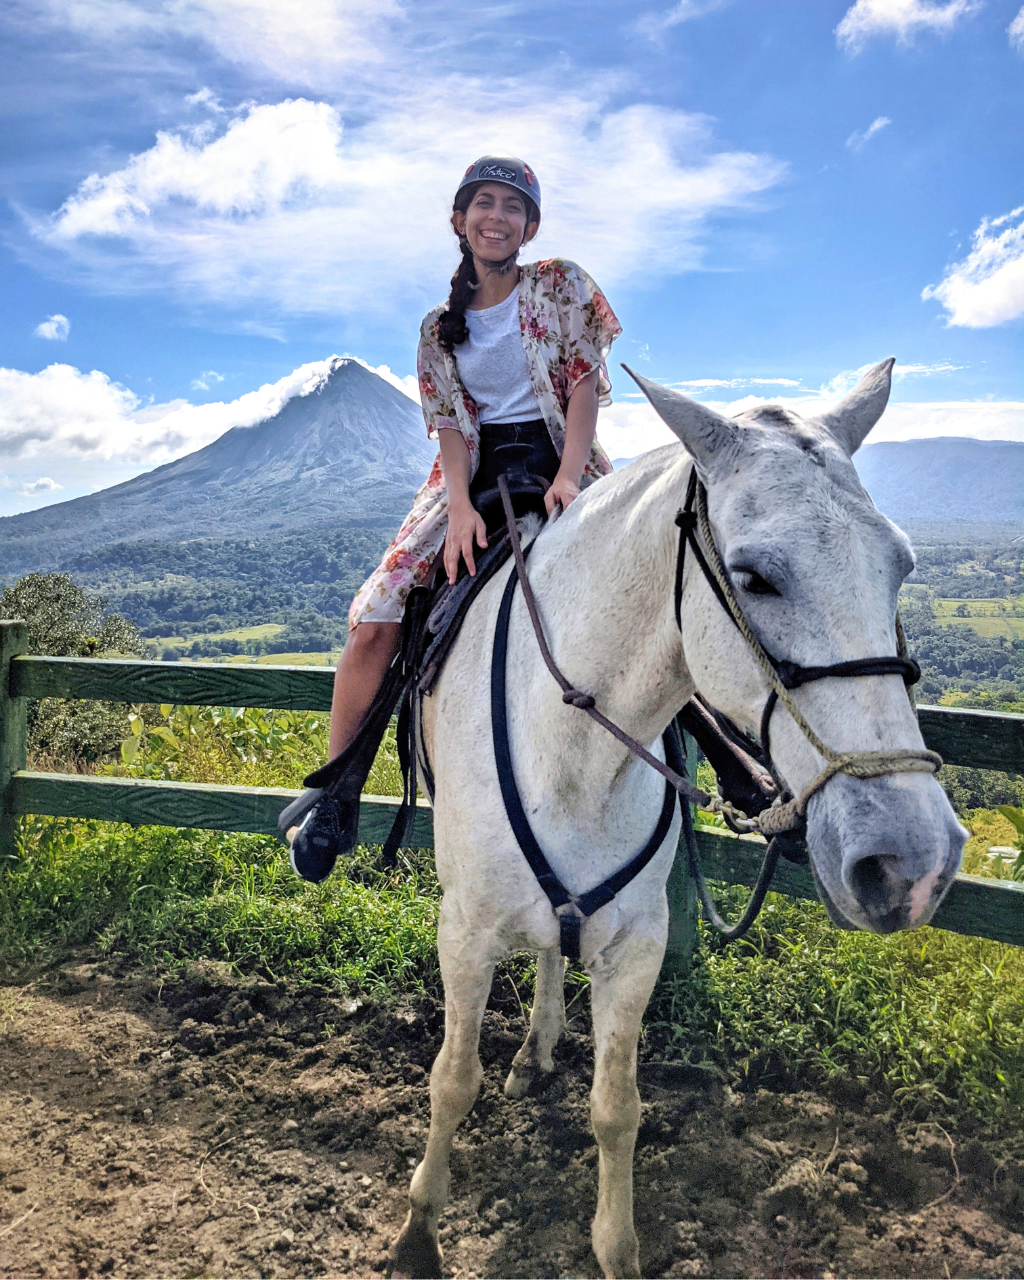 horseback riding with volcano views in Costa Rica